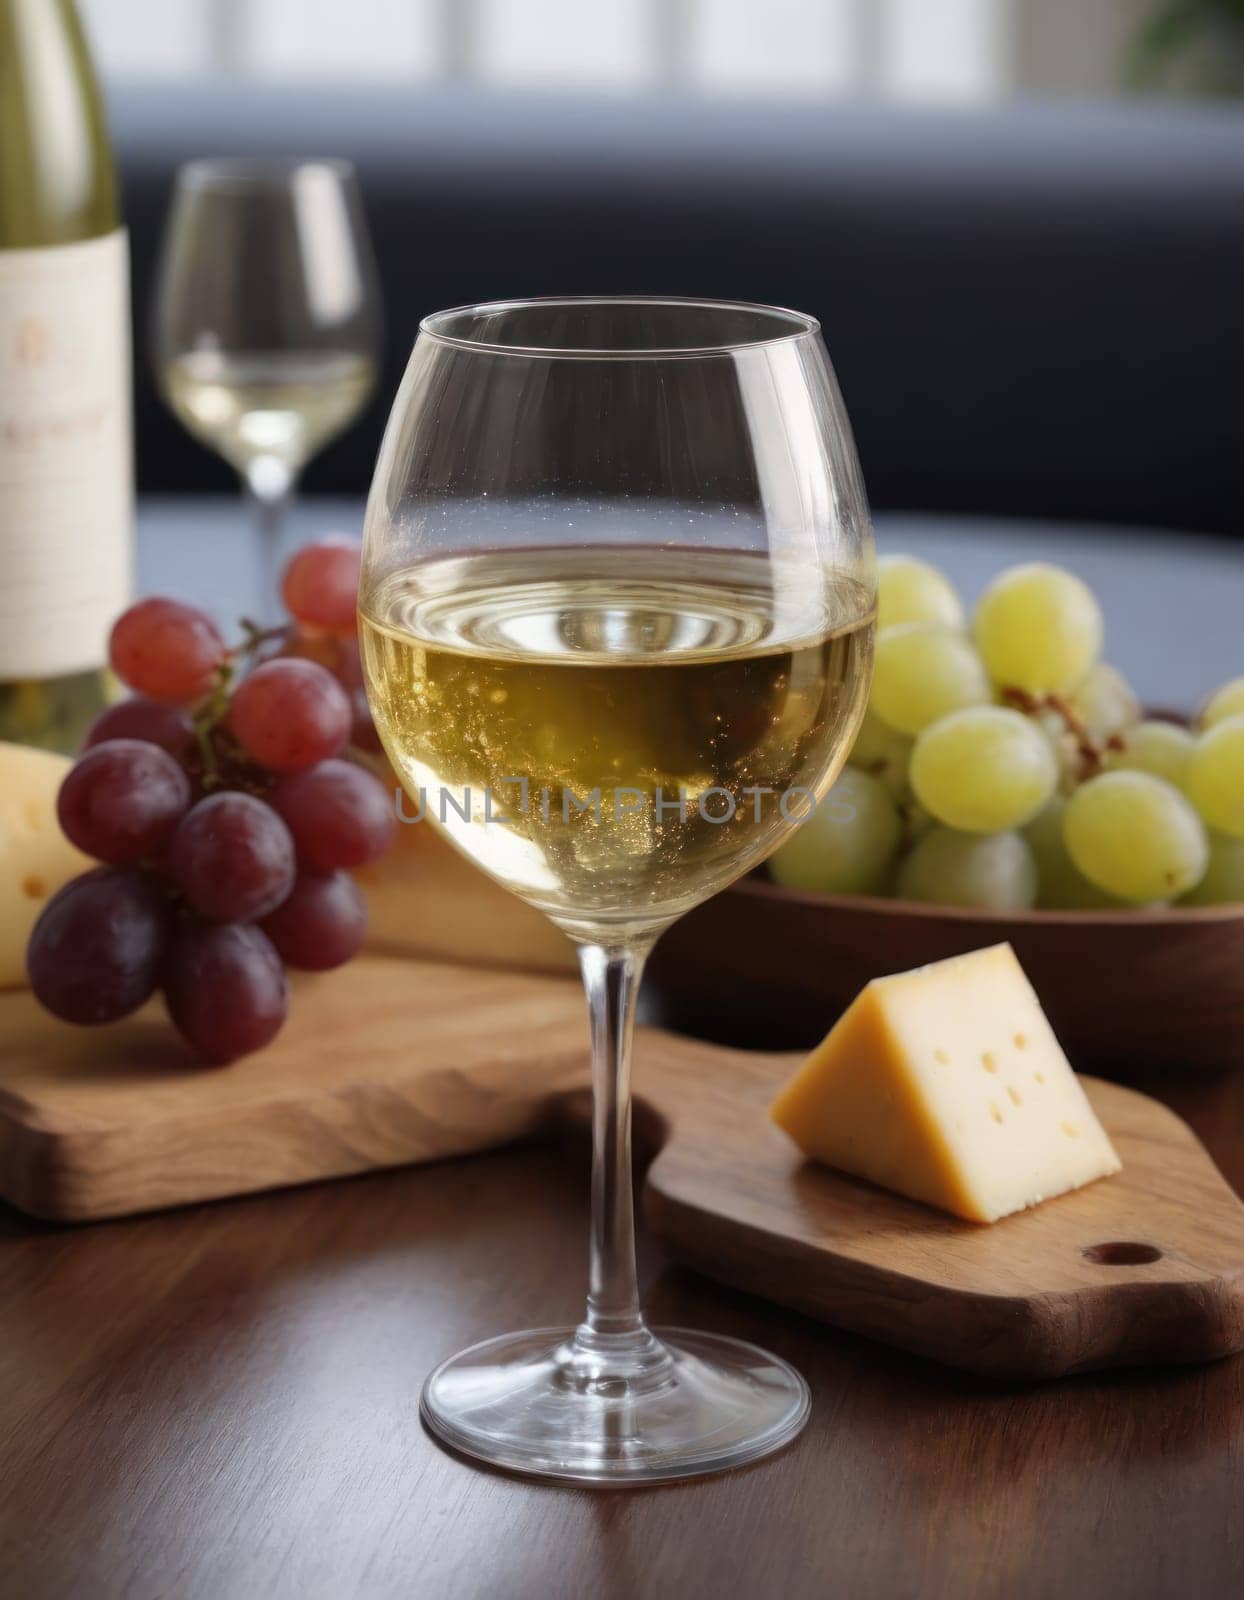 Cozy wine tasting setting glass of white wine, cheese, and grapes. A warm and inviting atmosphere for a relaxed evening or wine tasting. by Matiunina